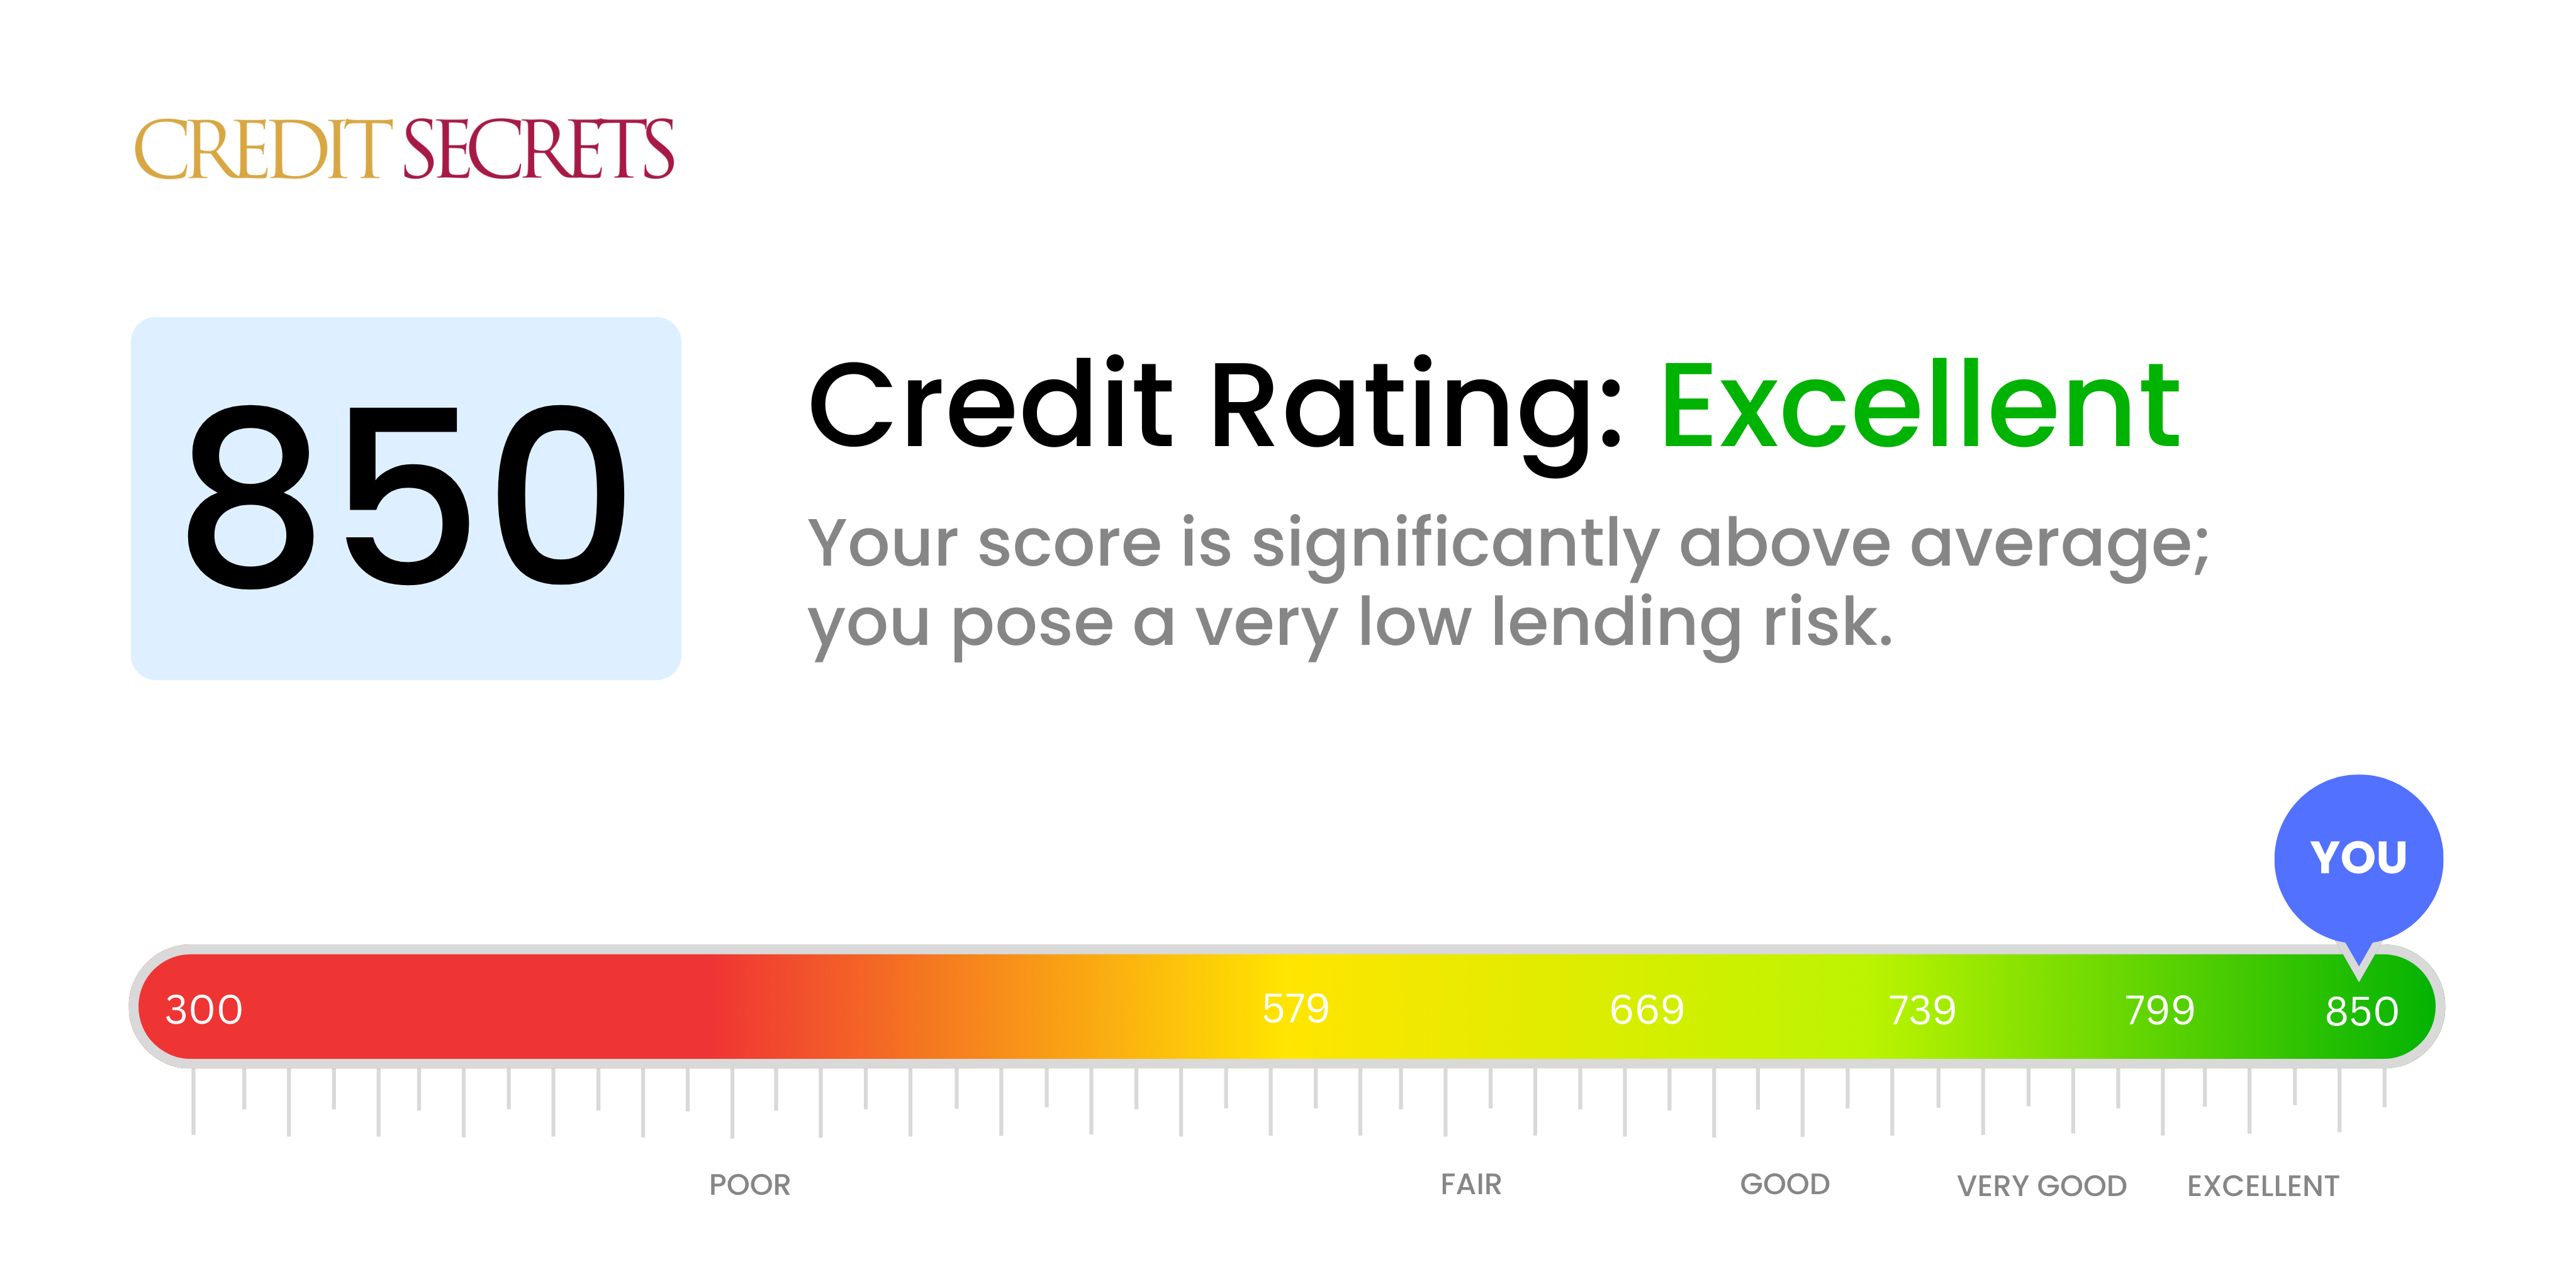 Is 850 a good credit score?